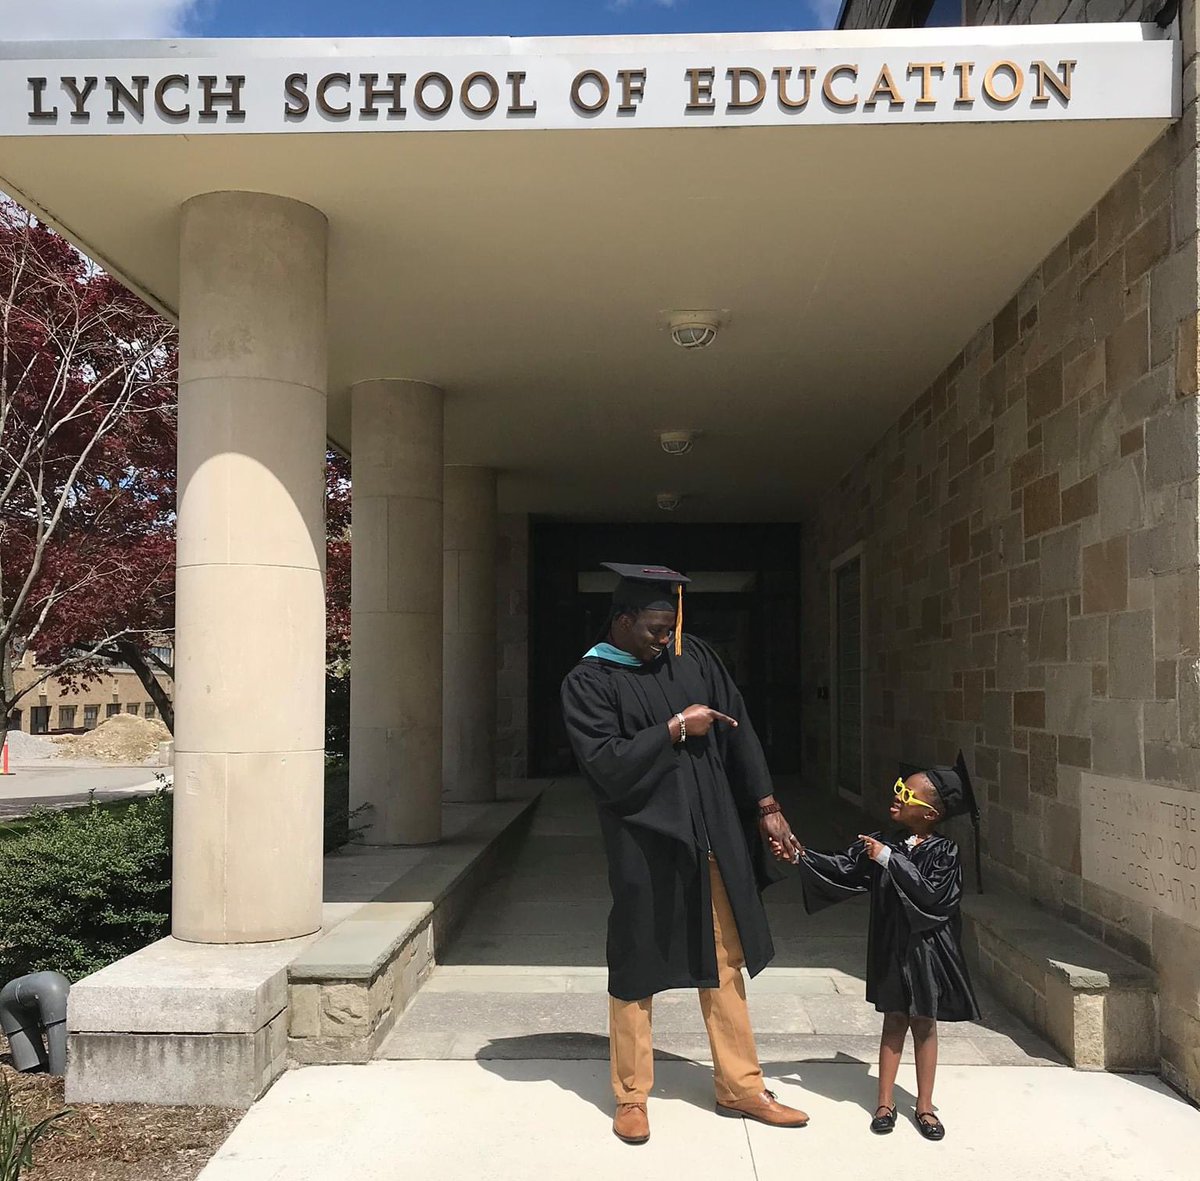 #ThrowbackThursday One of my most fondest moments was obtaining my Masters degree the same year Emory graduated from Kindergarten. Modeling academic excellence for her then has led to her excelling academically ever since. My ceiling shall be her floor. #IntergenerationalMobility